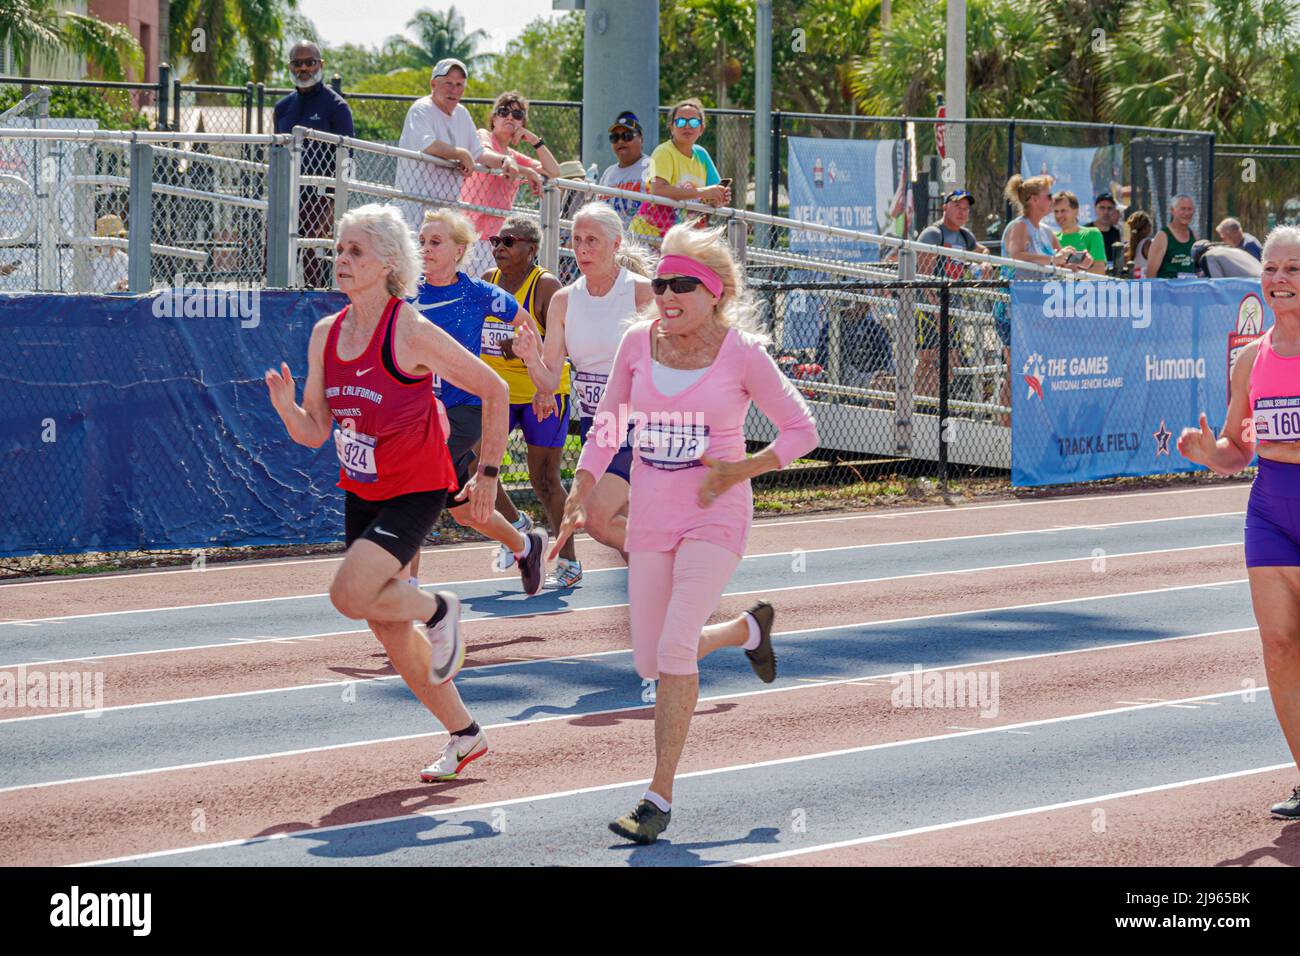 Fort ft. Lauderdale Florida, Ansin Sports Complex Track & Field National Senior Games, donne anziane runner concorrenti in corsa 100m 1 Foto Stock